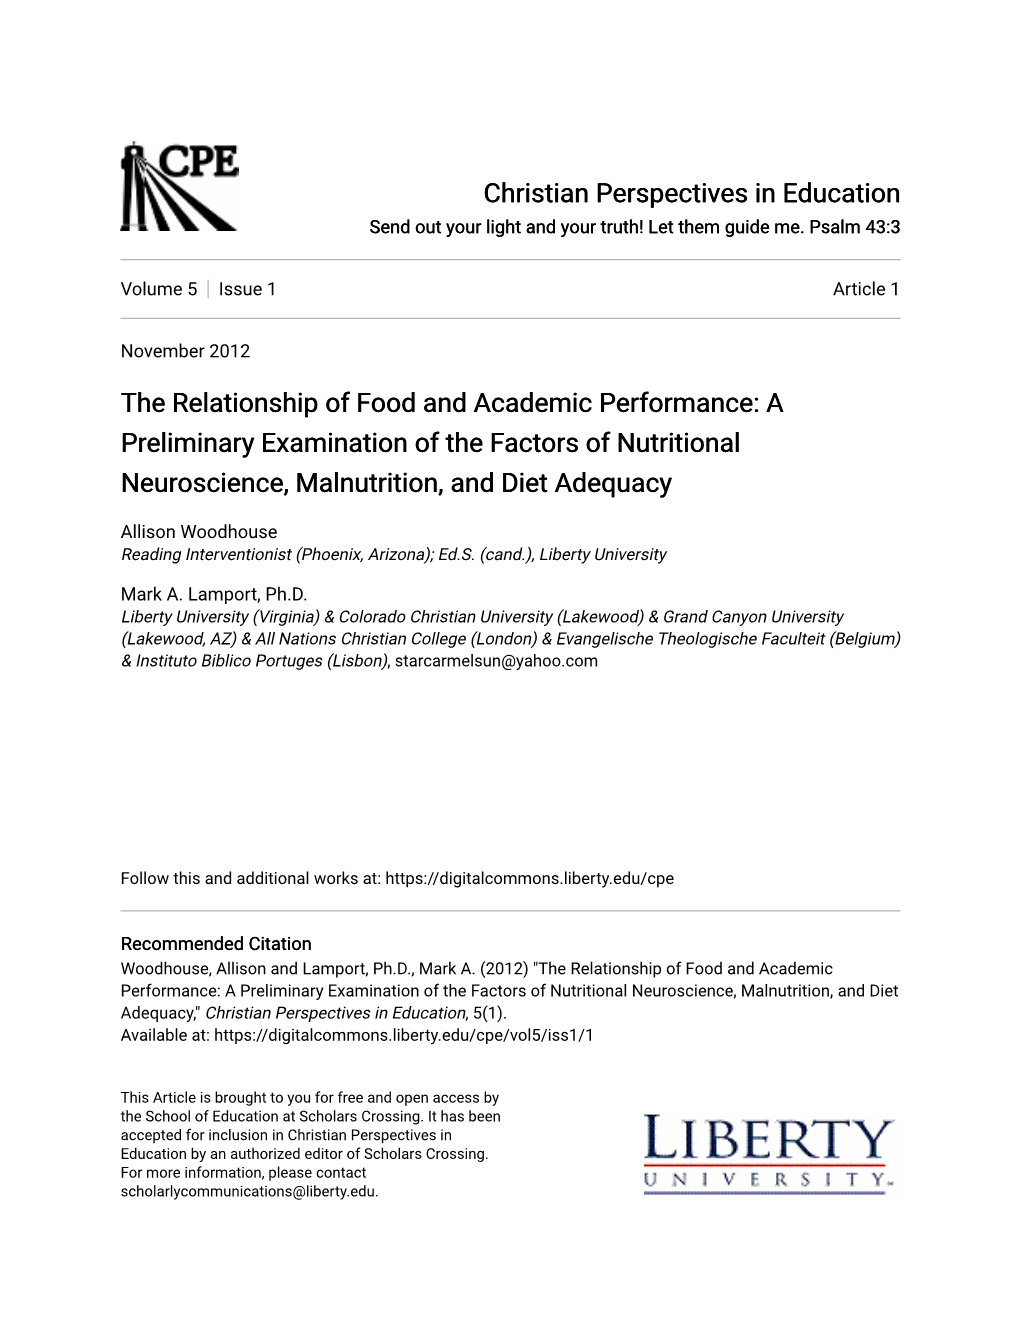 A Preliminary Examination of the Factors of Nutritional Neuroscience, Malnutrition, and Diet Adequacy